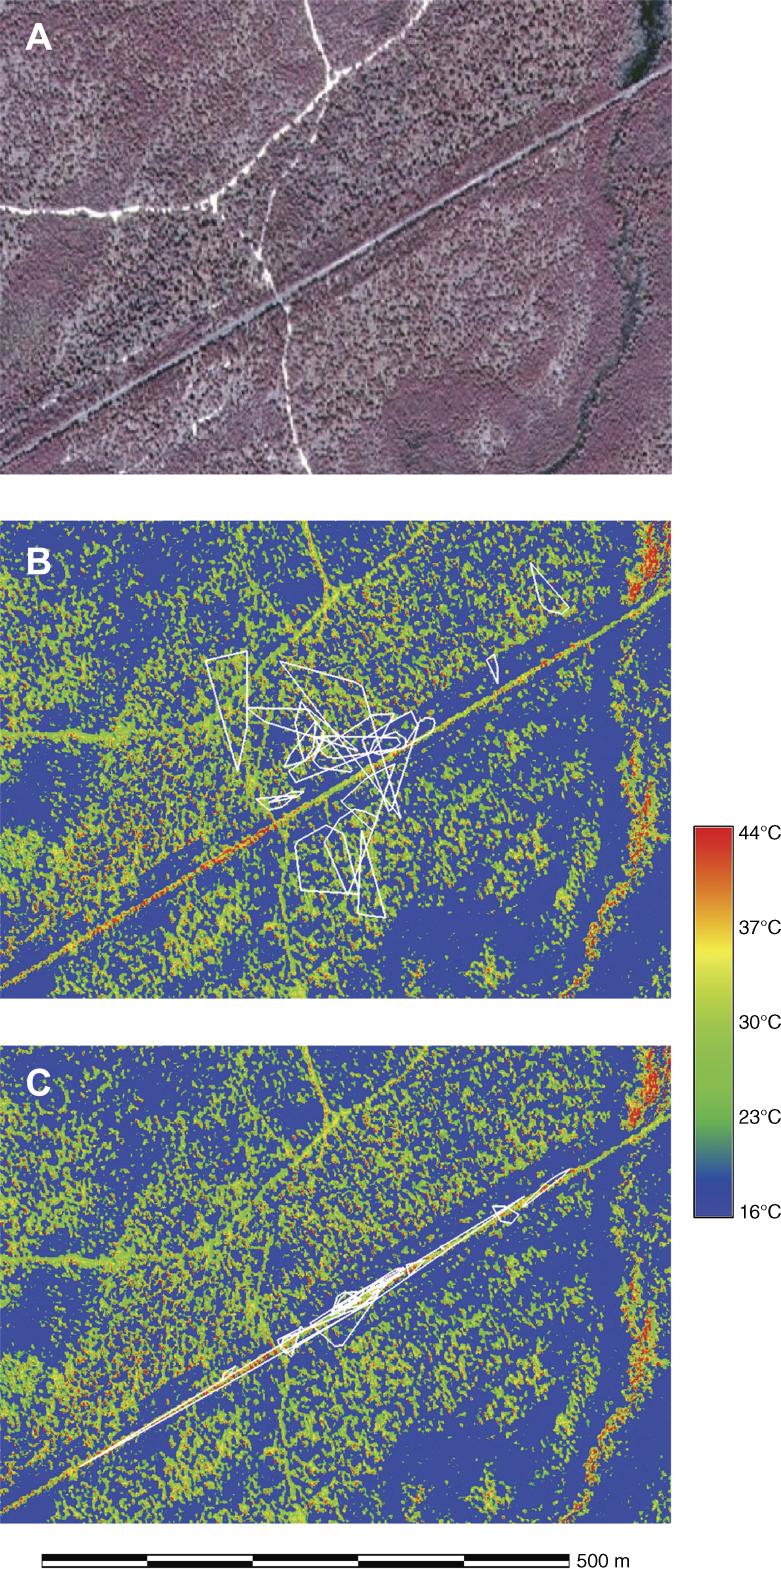 October 2009 NOTES 2937 FIG. 3. An artiﬁcial neural network was used to convert (A) an aerial photograph of the study area into (B and C) a thermal map.